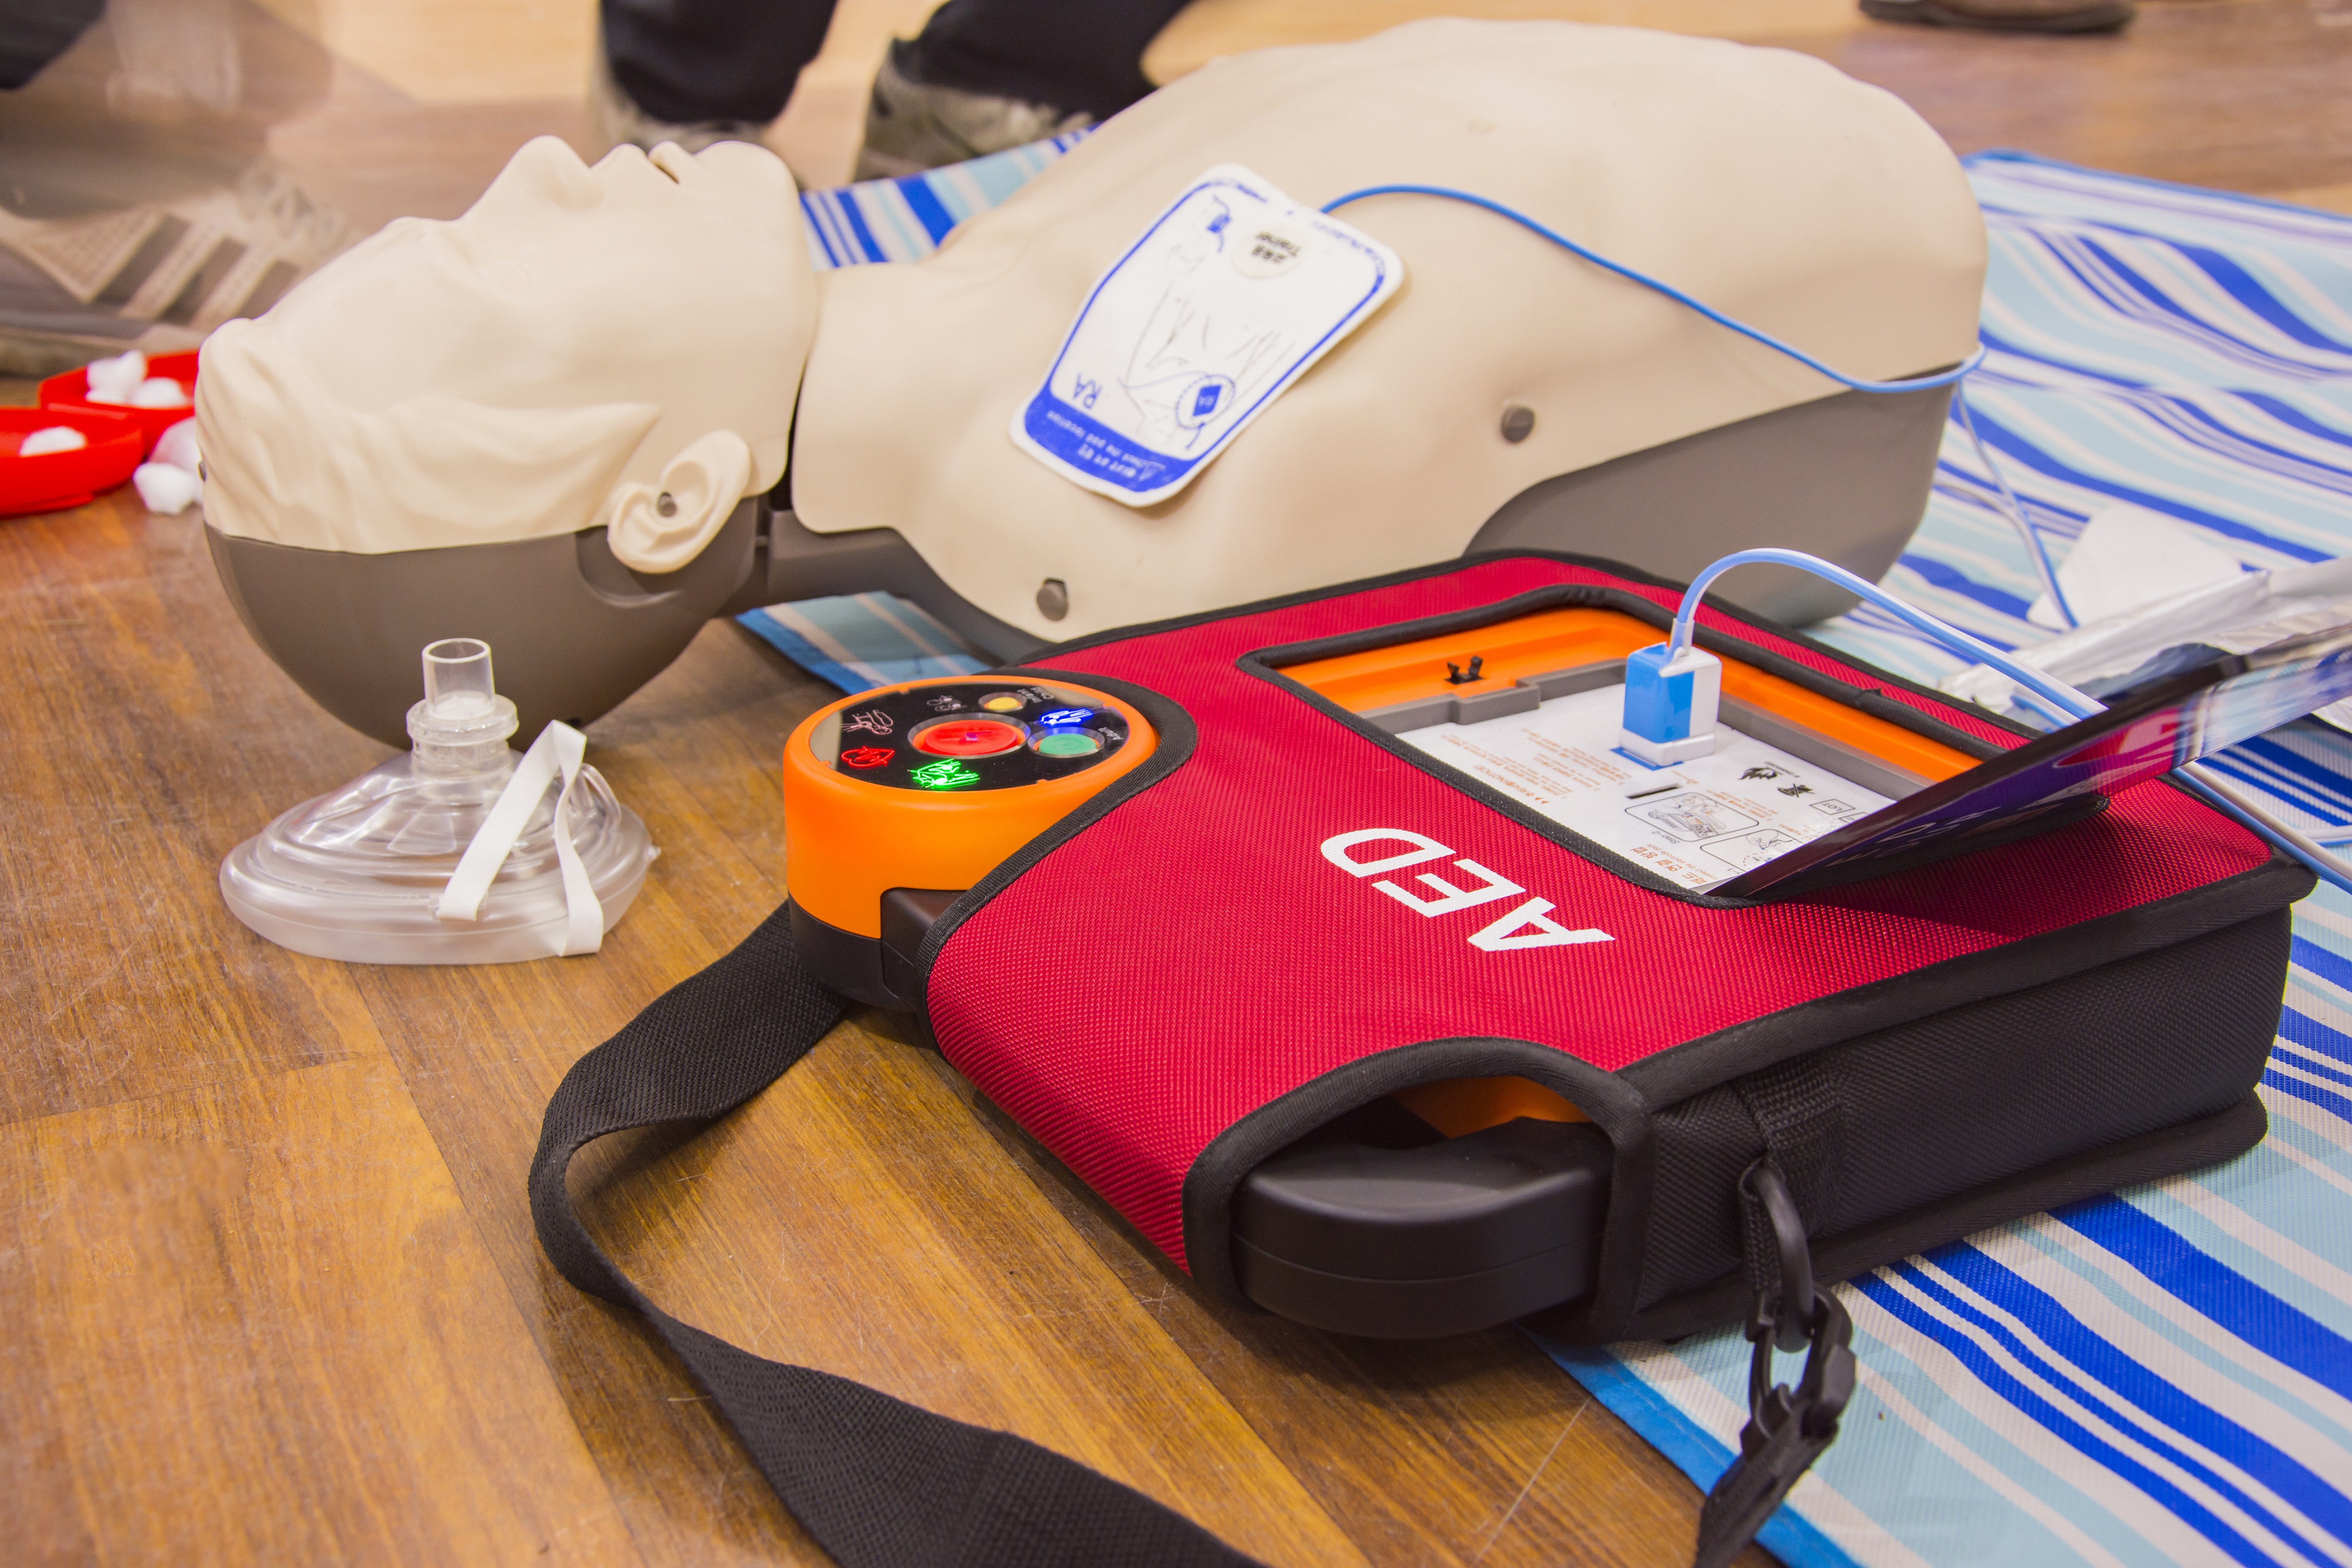 CPR AED First Aid Training Class October 22, 2022 in Tigard